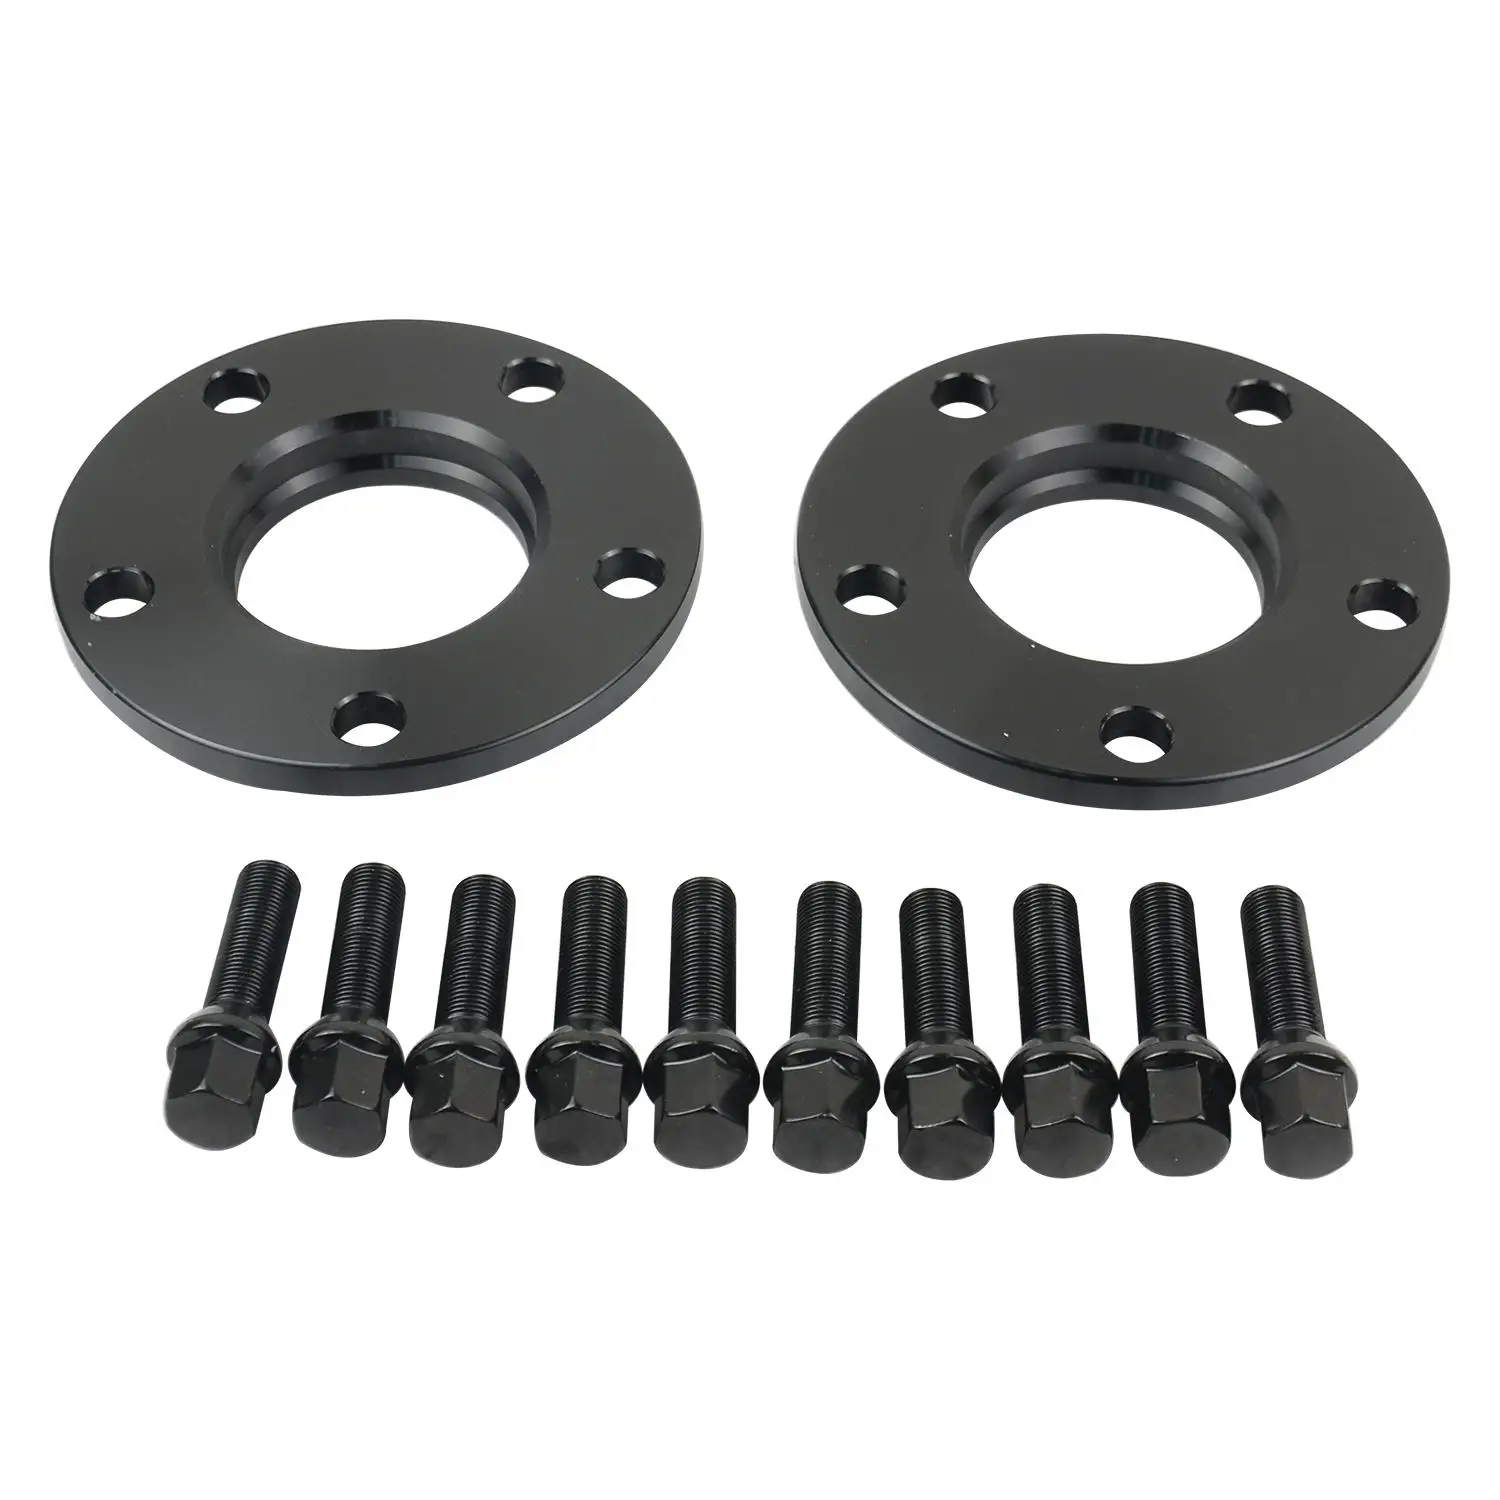 4 X 20MM WHEEL SPACERS BLACK BOLTS & LOCKING FIT FOR BMW 3 SERIES E36 E46 